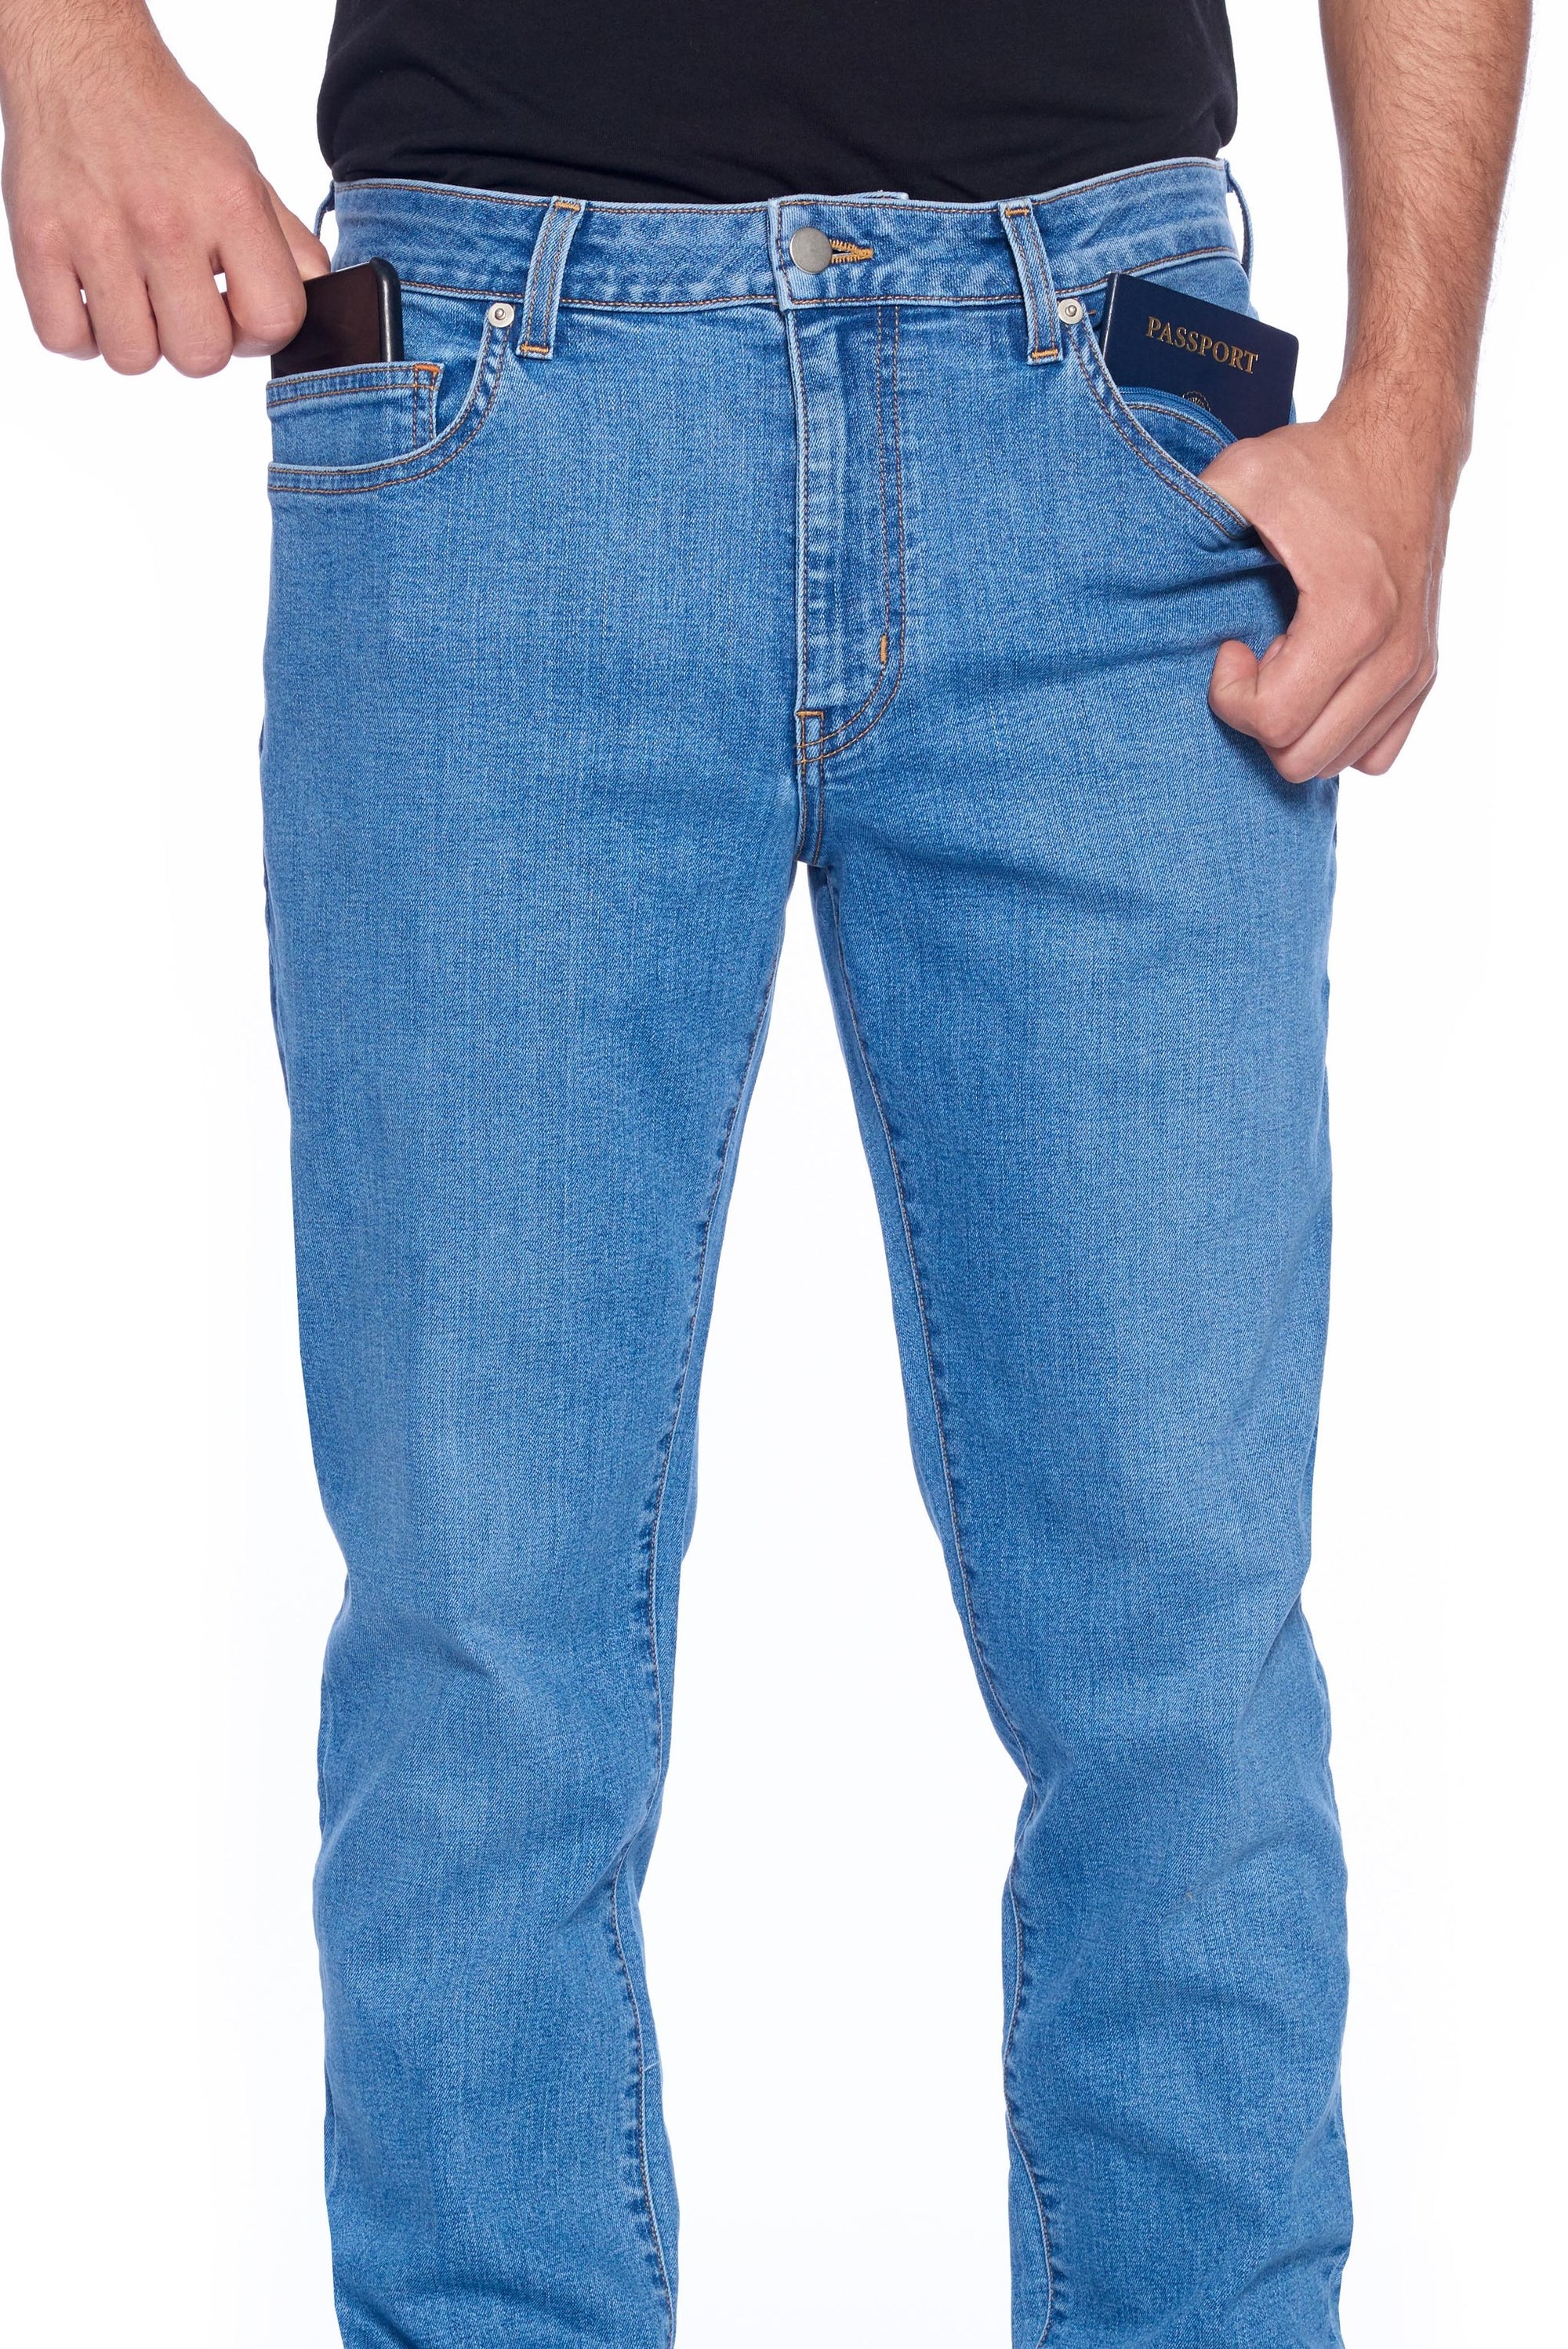 Best Travel Jeans*